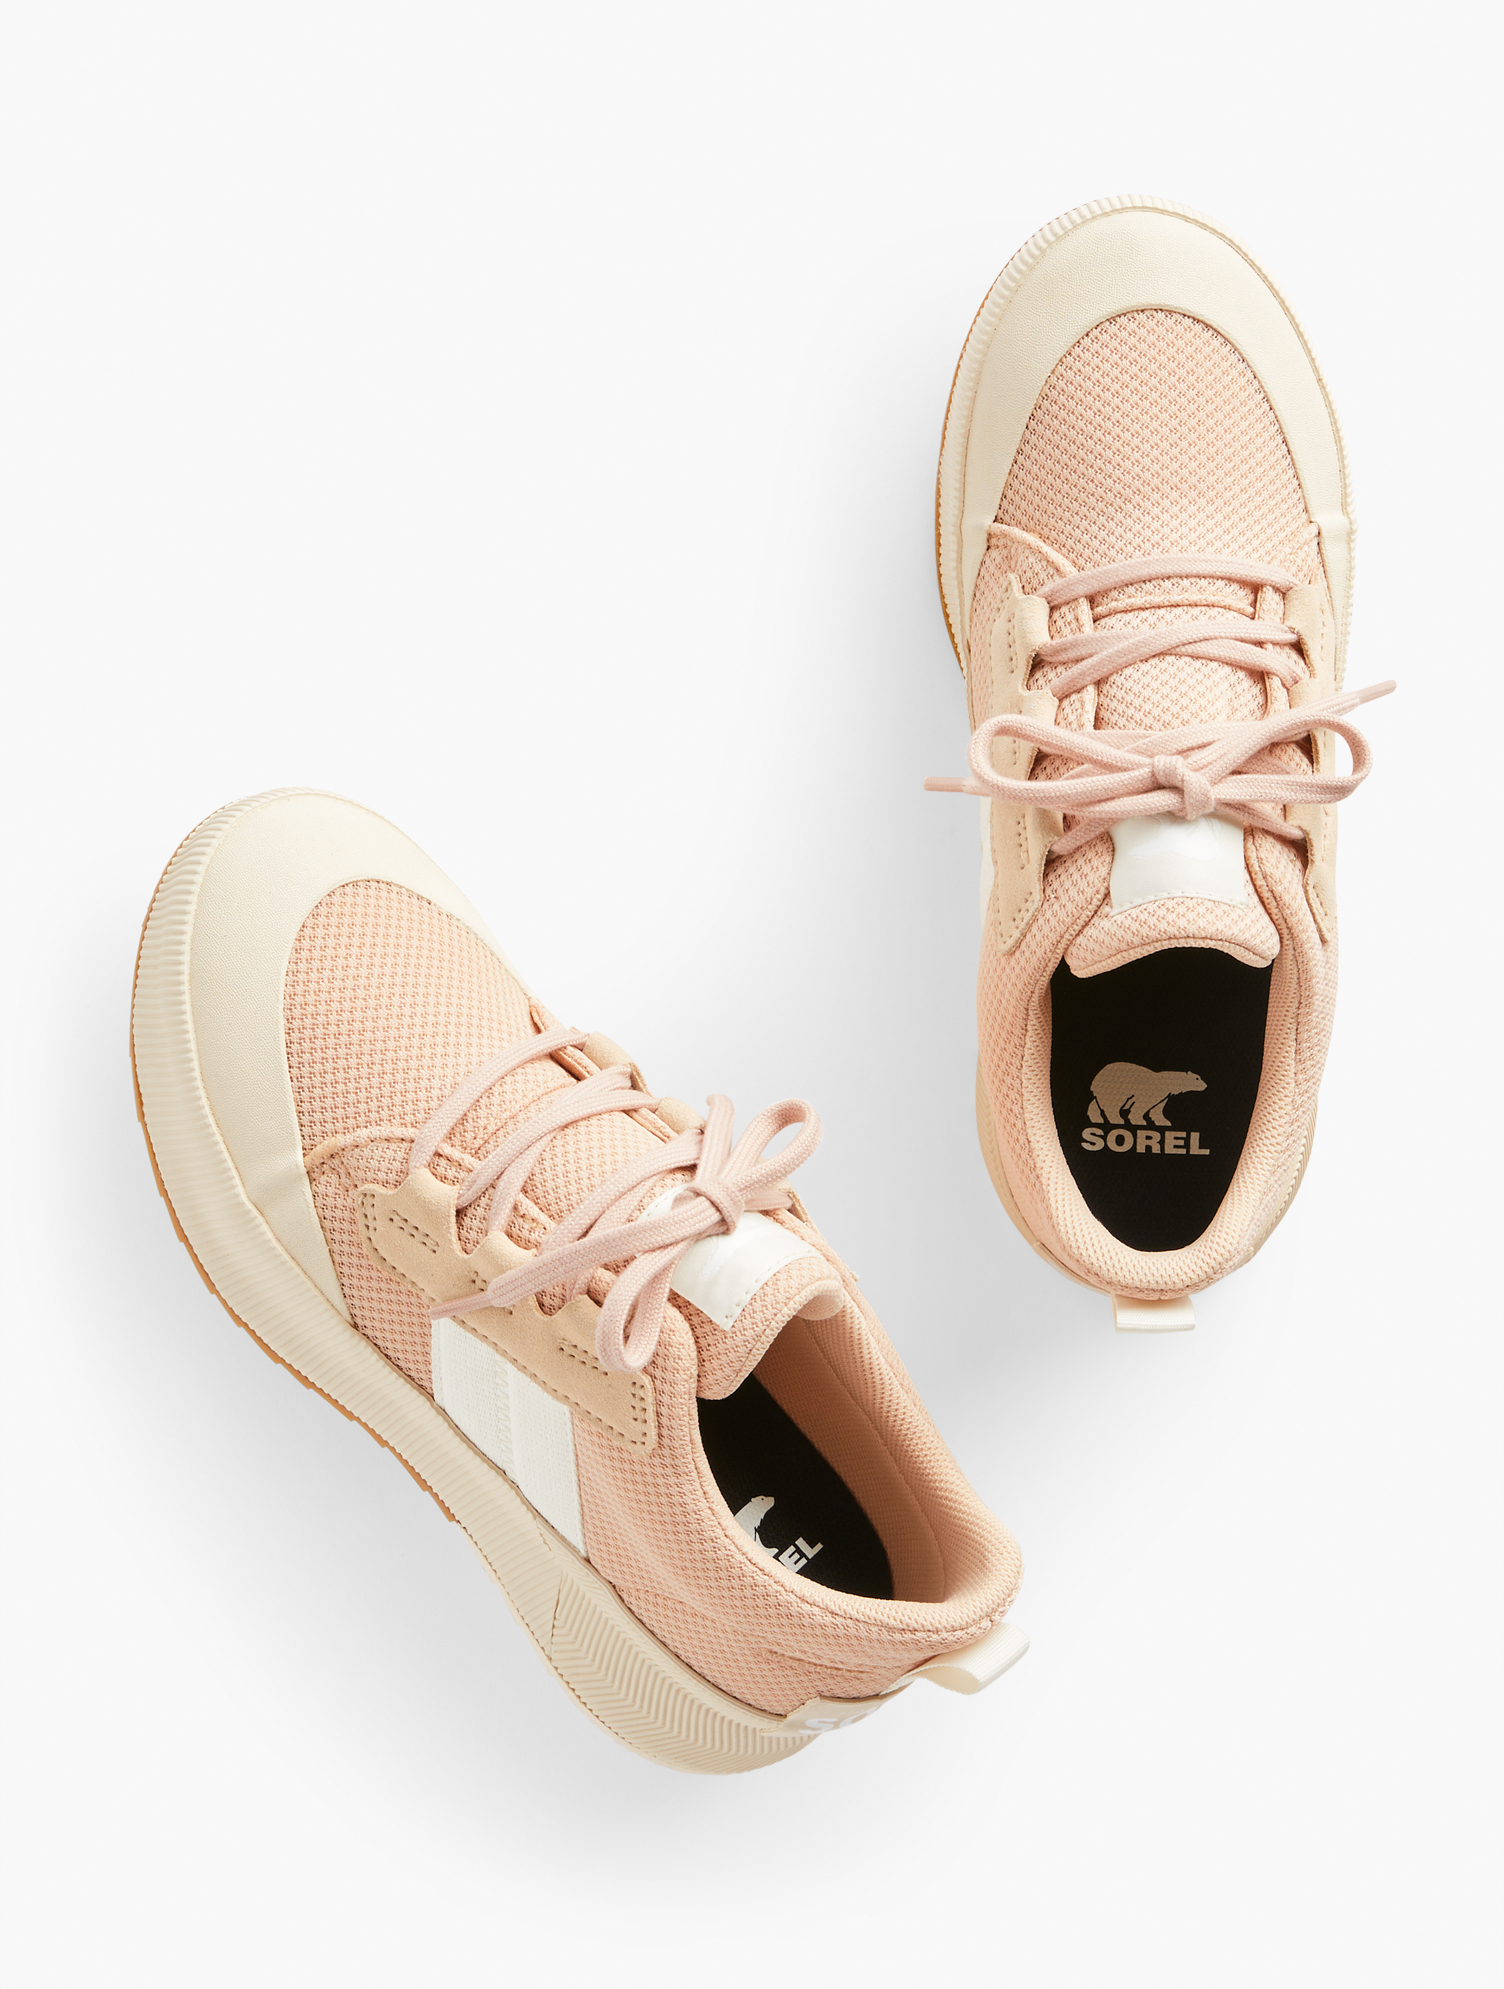 TALBOTS OUT N ABOUTÂ¢ WATERPROOF SNEAKERS - NOVA SAND/CHALK - 9M TALBOTS